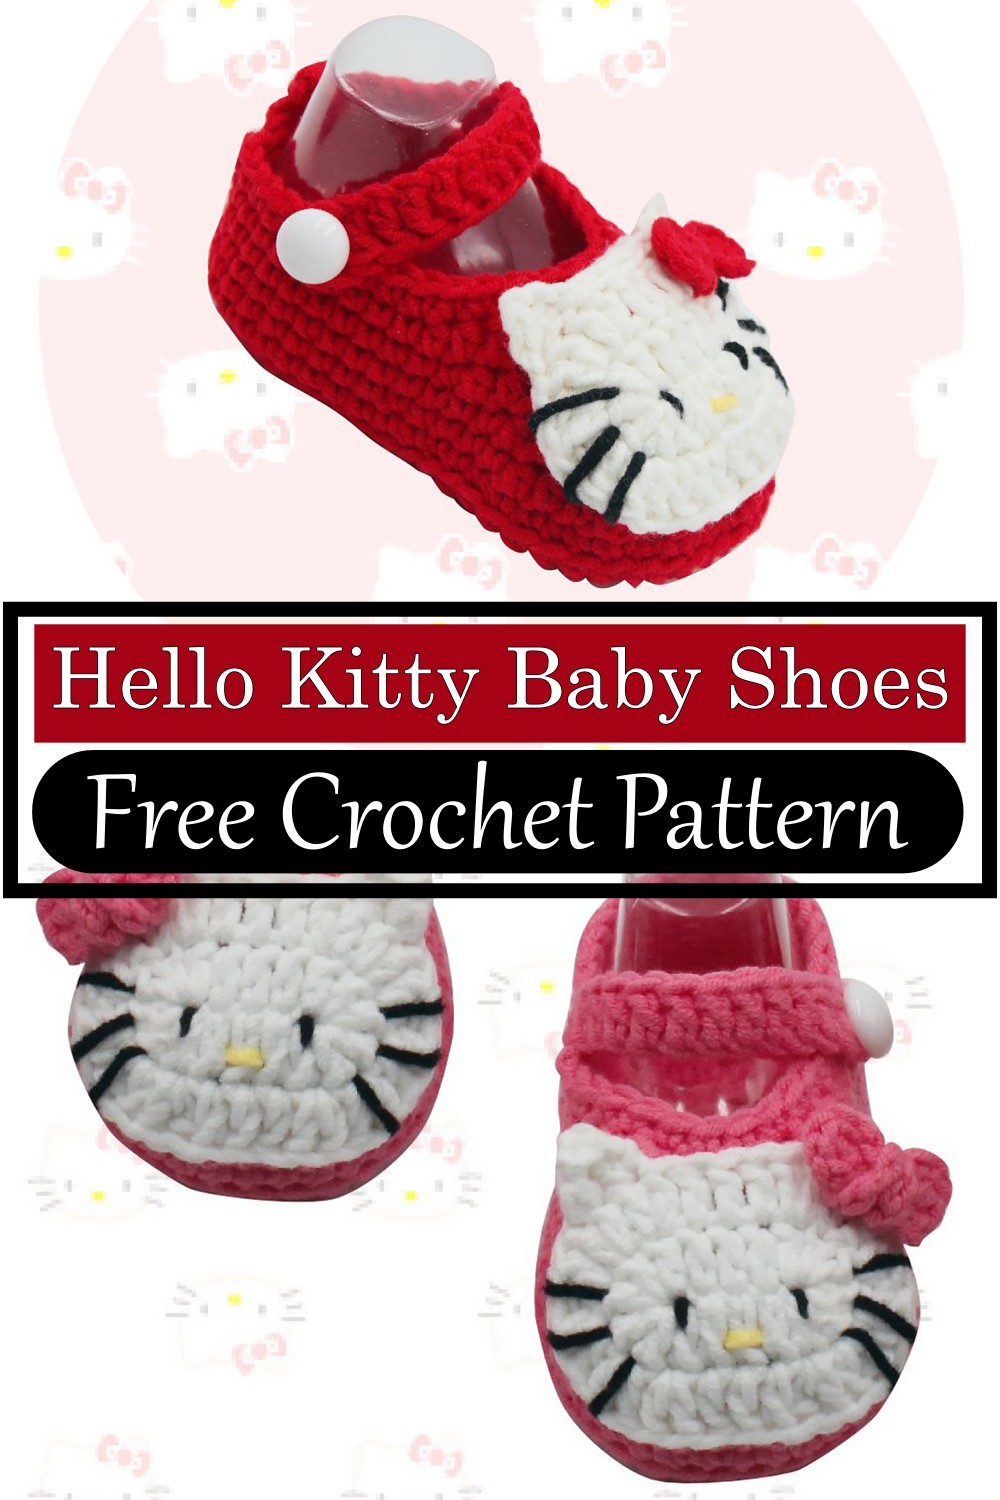 Hello Kitty Baby Shoes